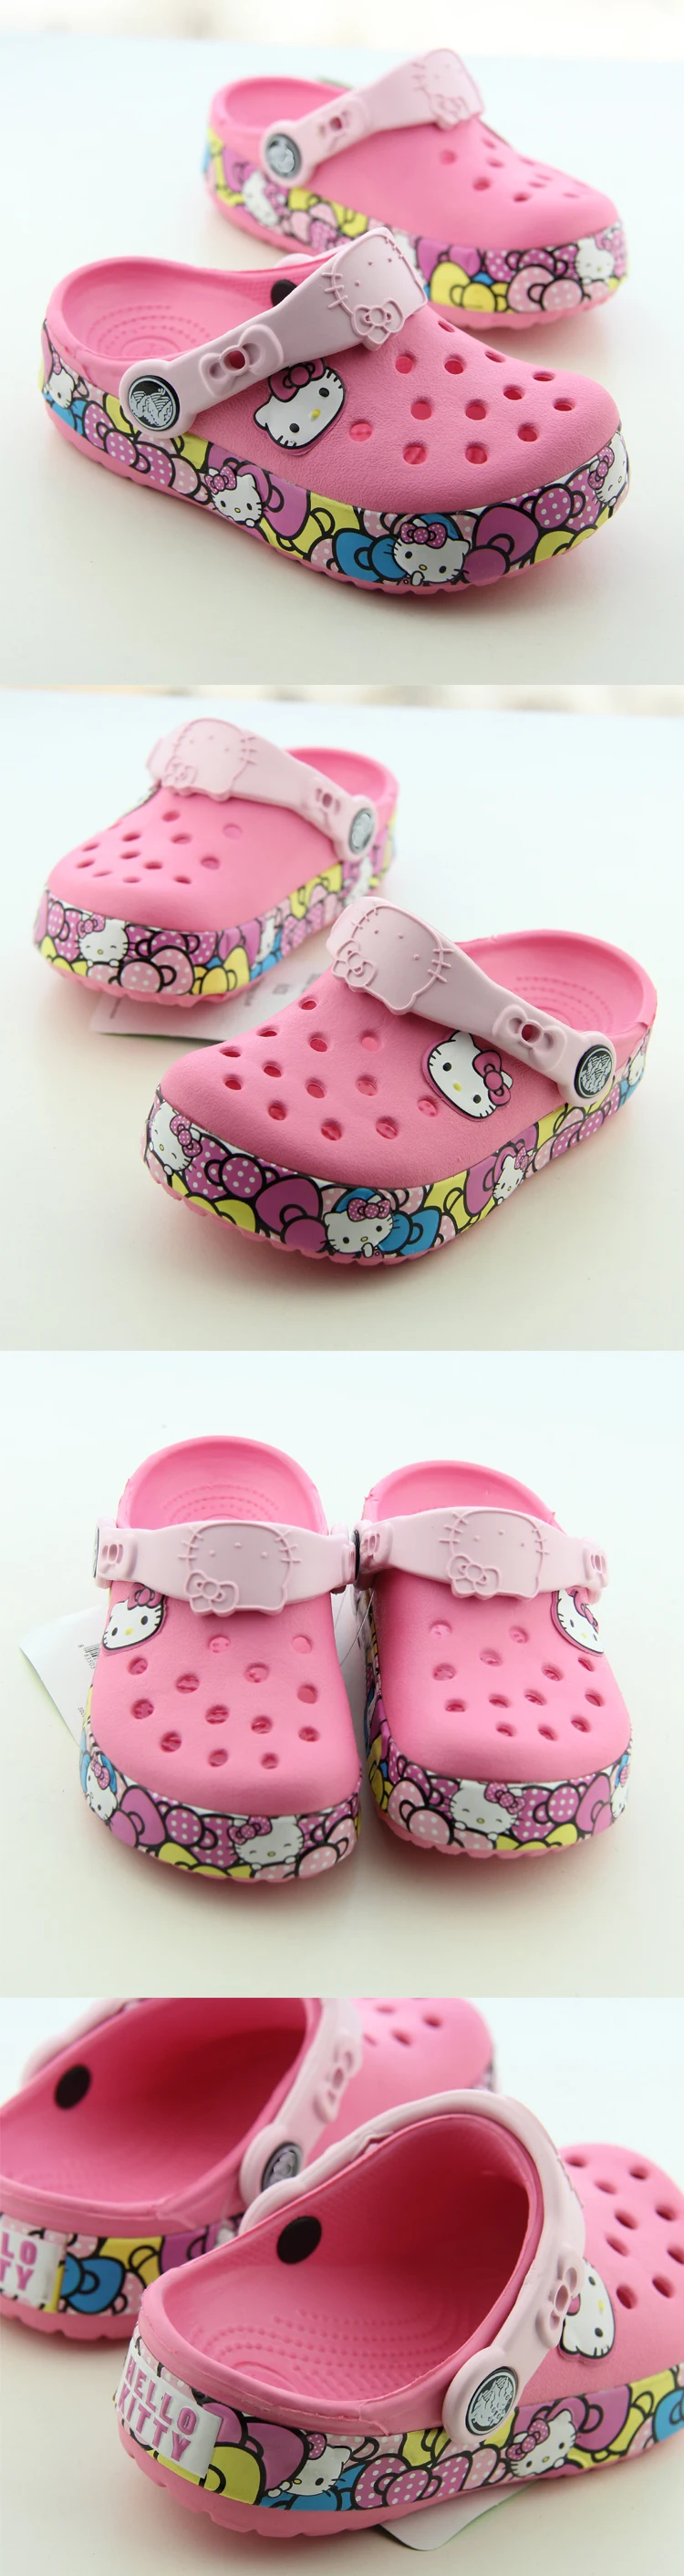 New Hello Kitty Breathable Kid Girls Sandals with Holes